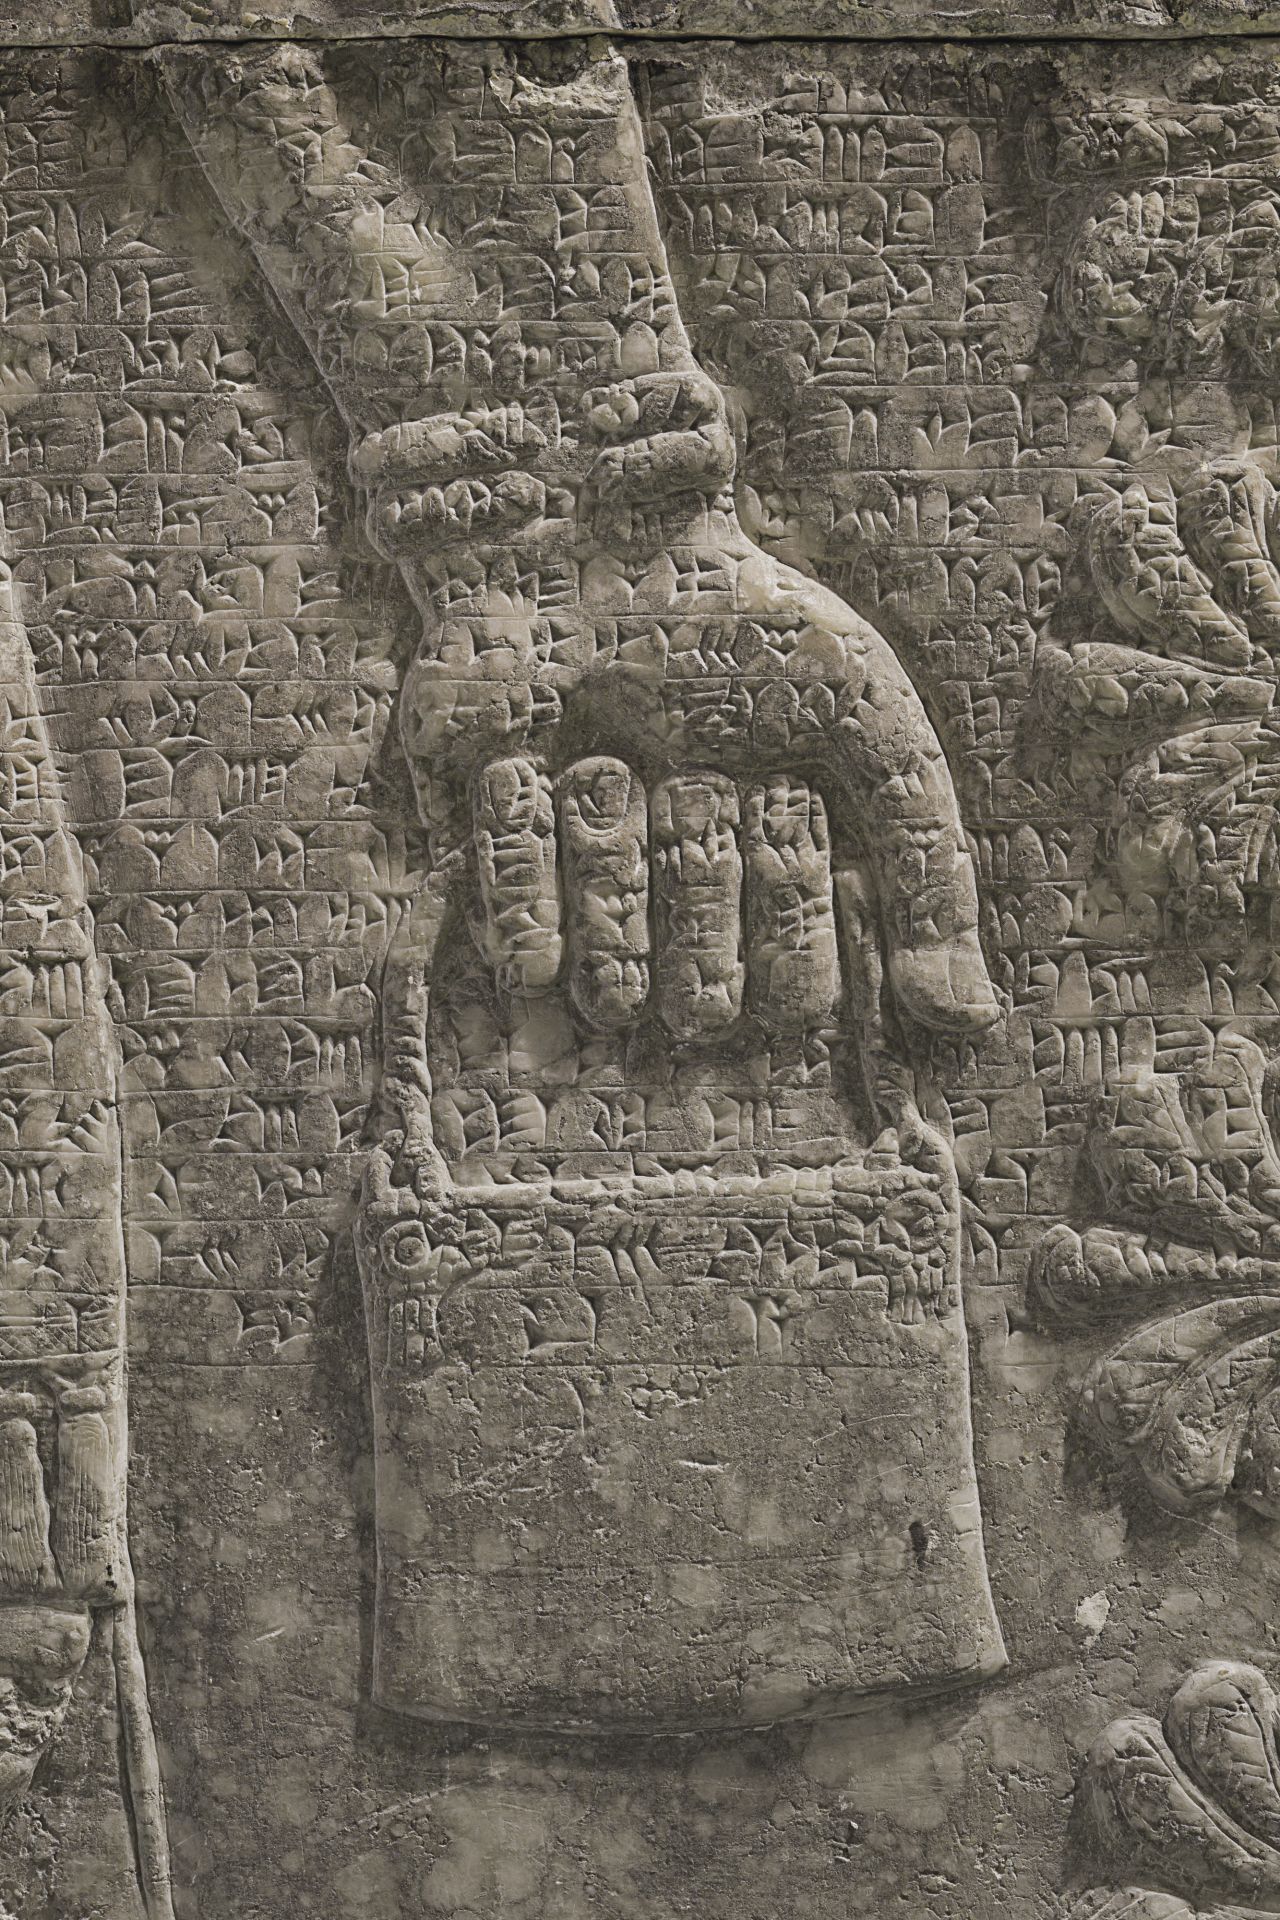 The winged genius carries a bucket-shaped vessel known as a situla in his left hand. 